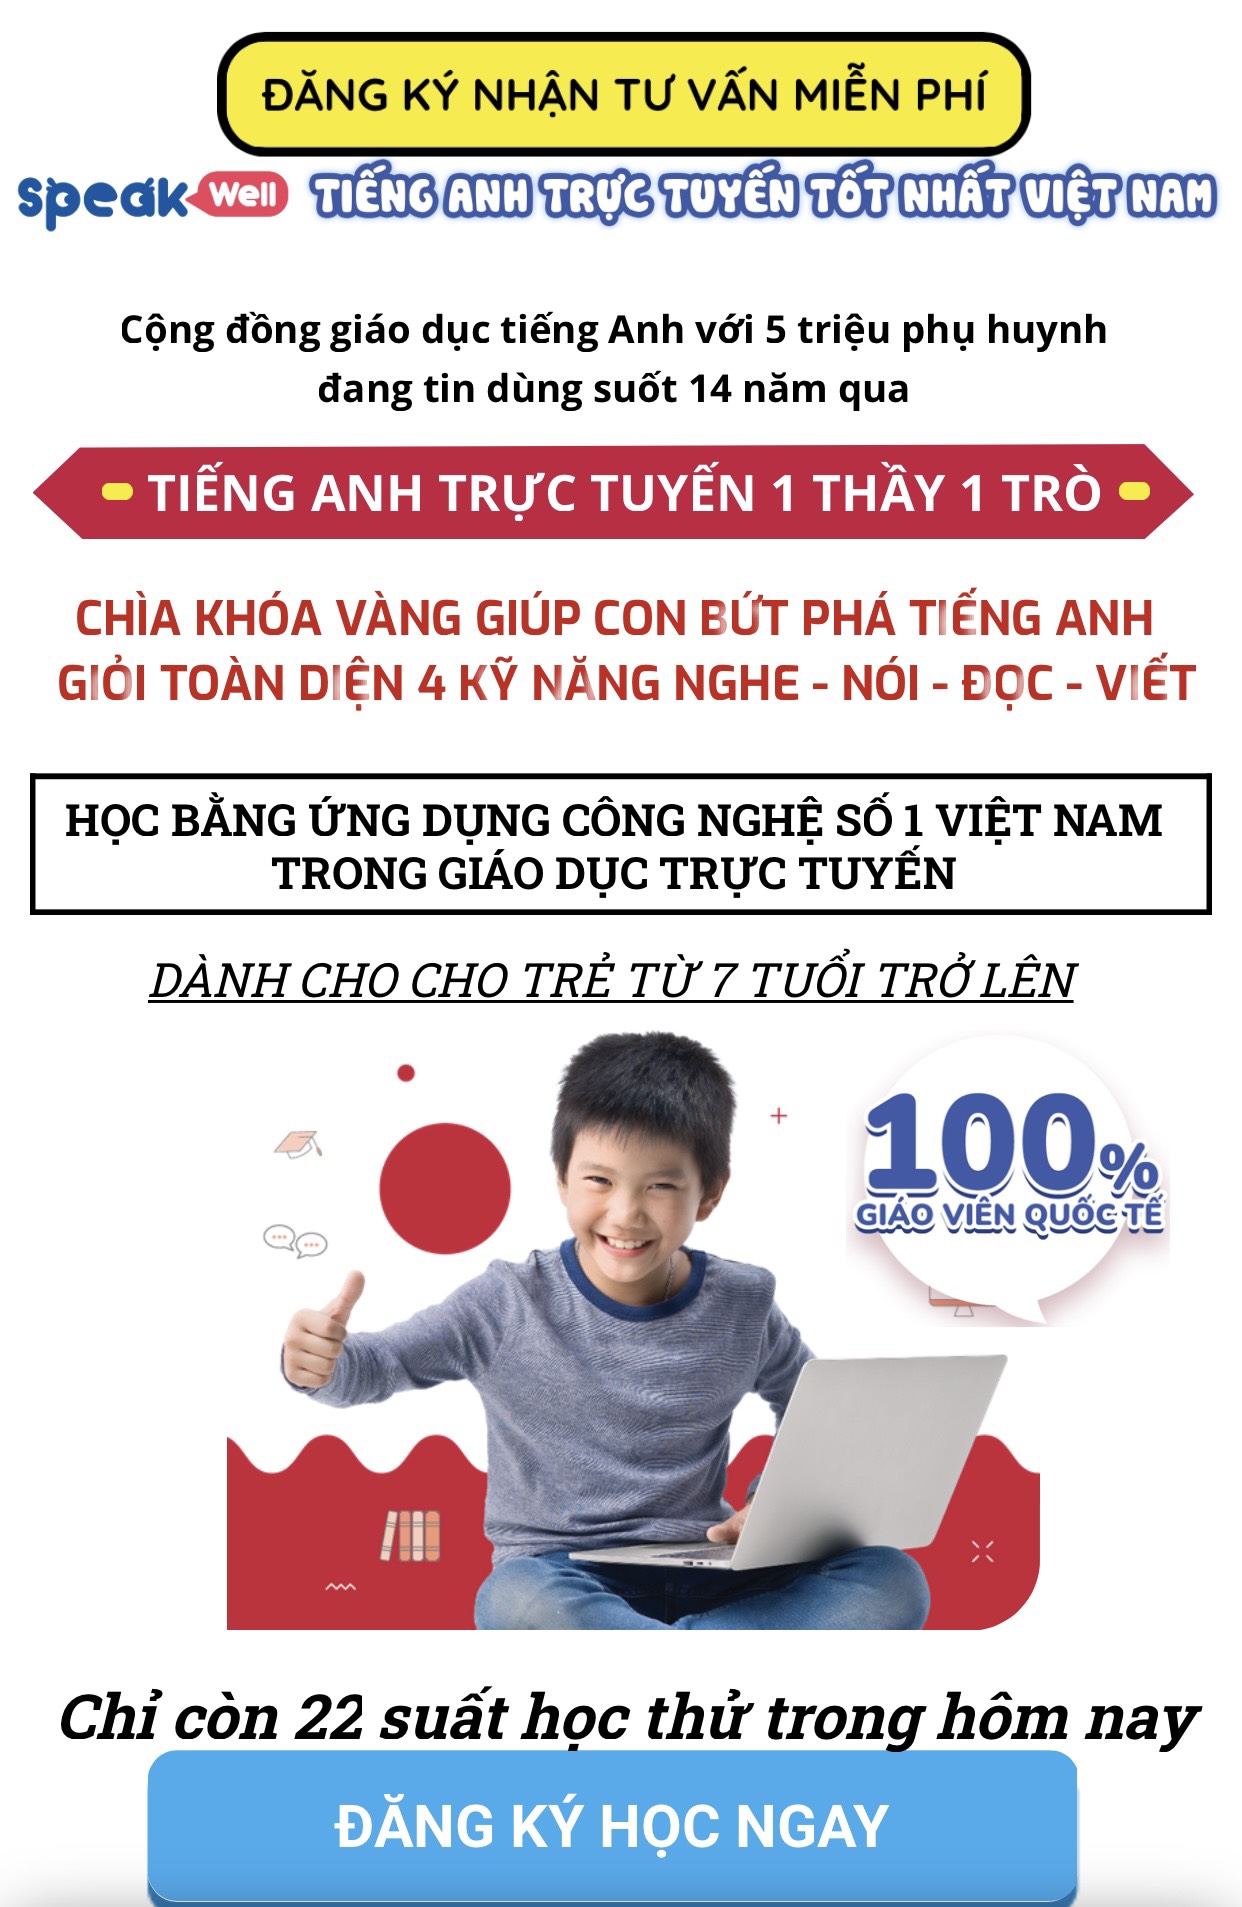 Tiếng Anh online!